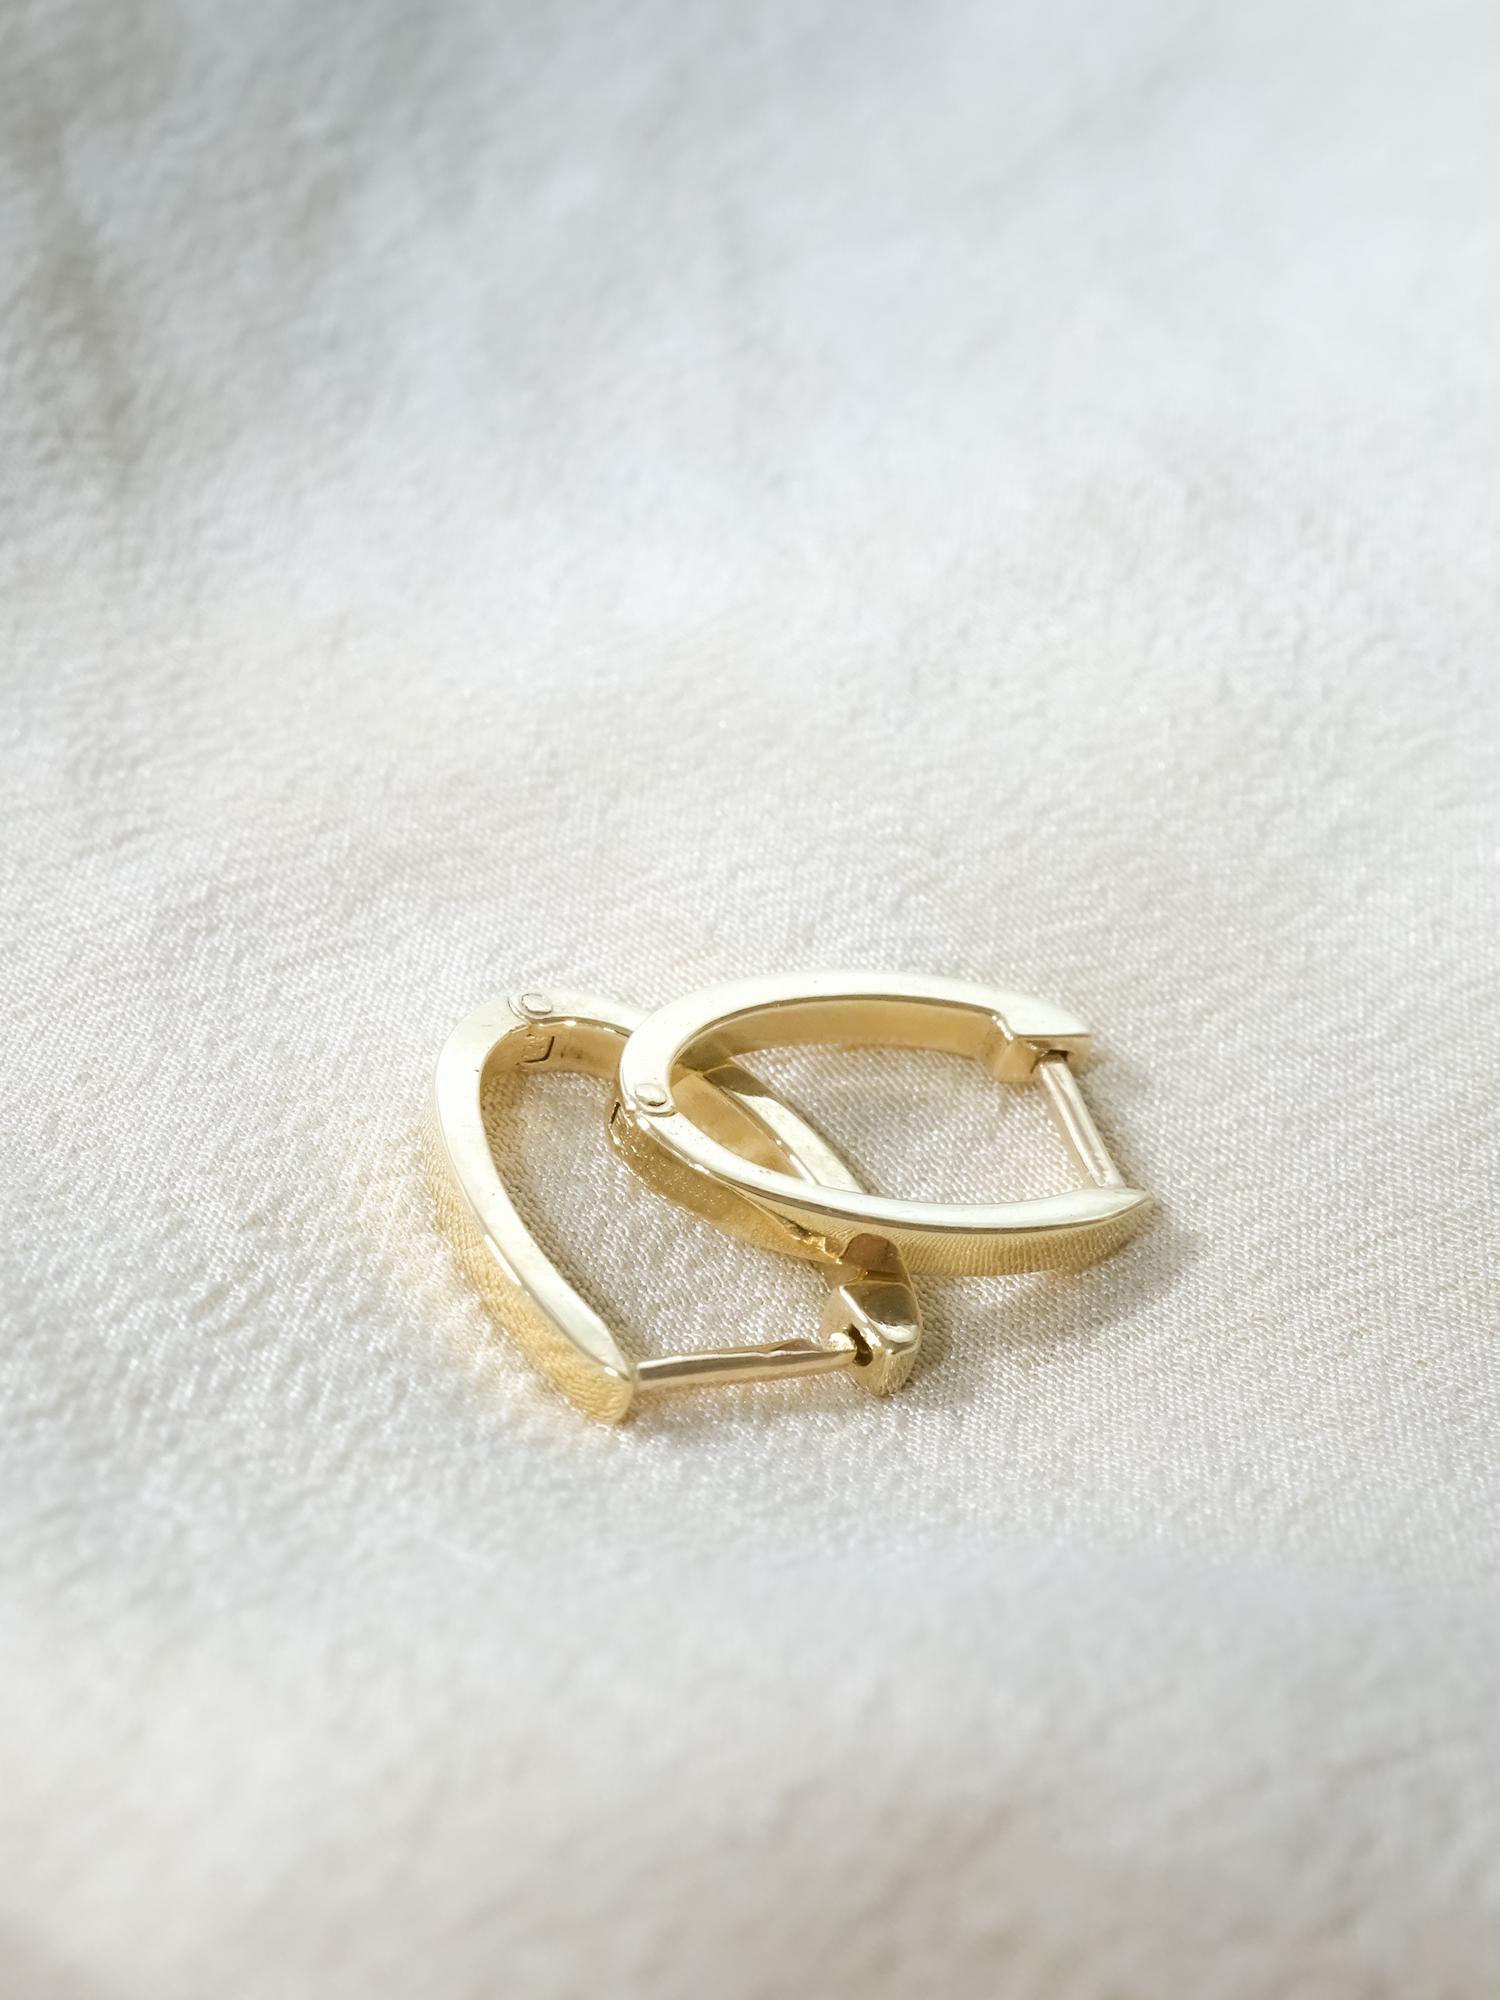 14 Karat Yellow Gold Small Oval Classic Hinge Hoop Earrings by Mon Pilar In New Condition For Sale In Brooklyn, NY